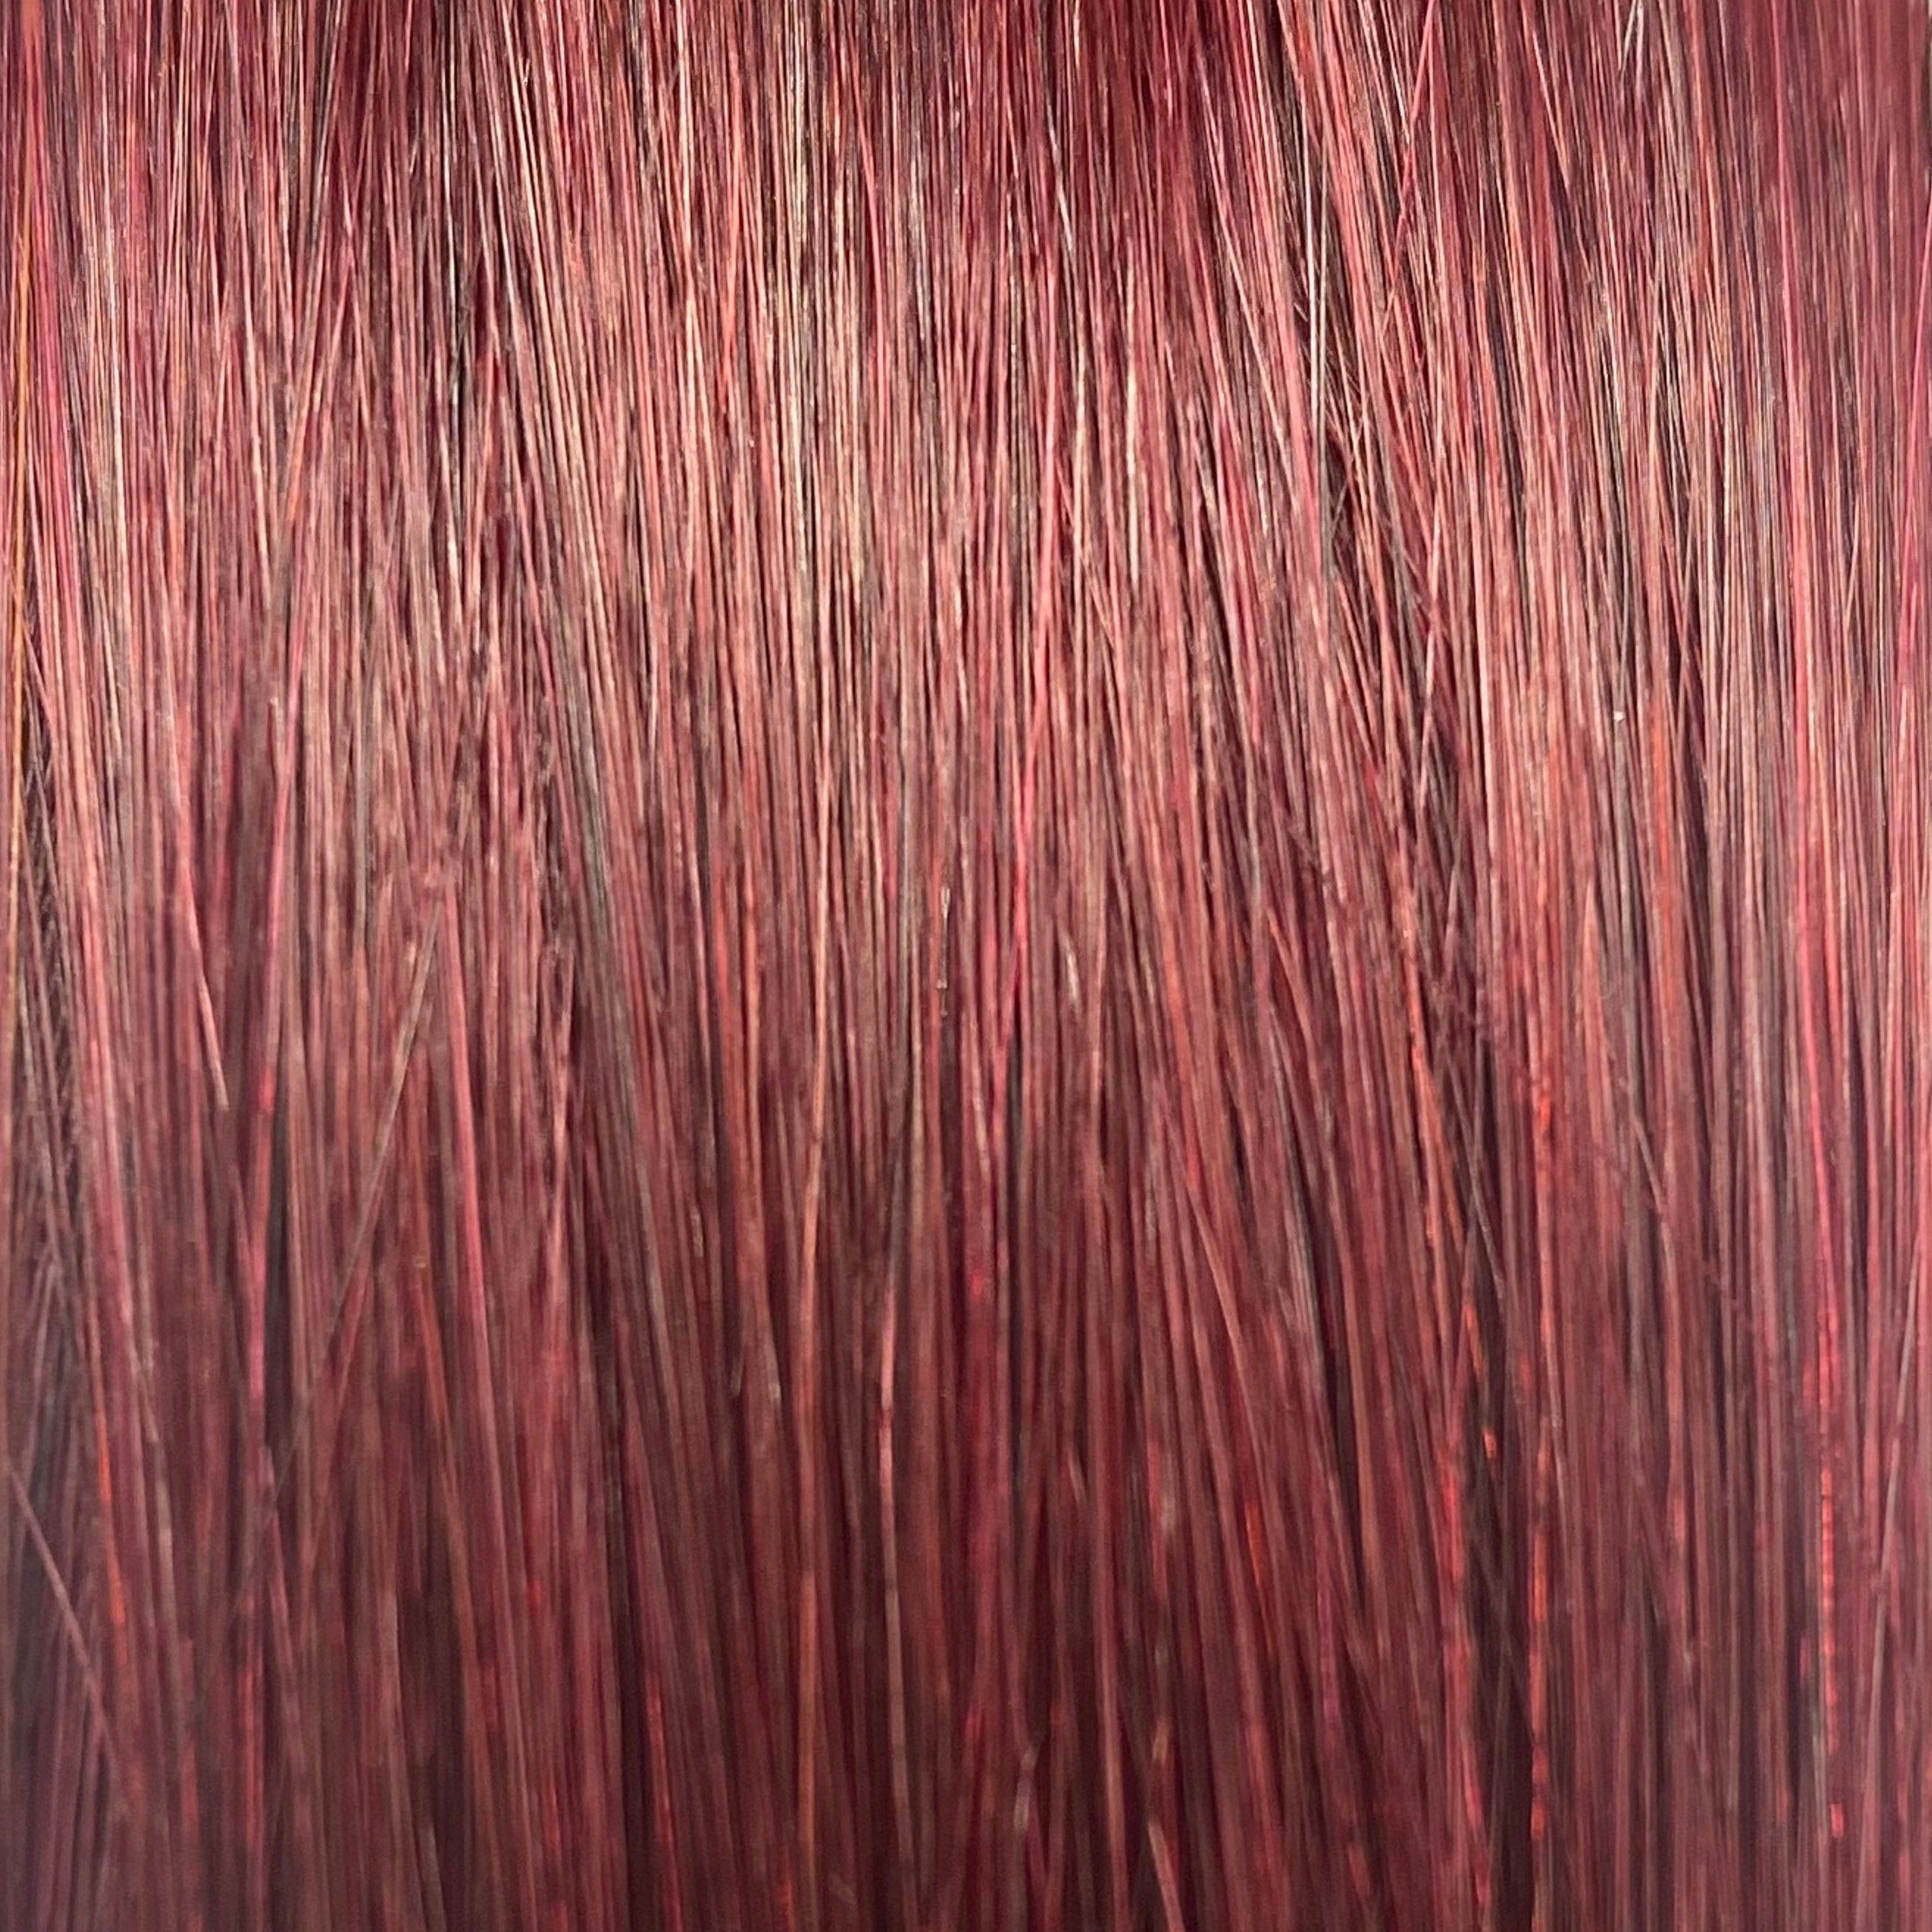 FUSION #530 DEEP DARK RED 50CM/ 20 INCHES  -  20 GRAMS